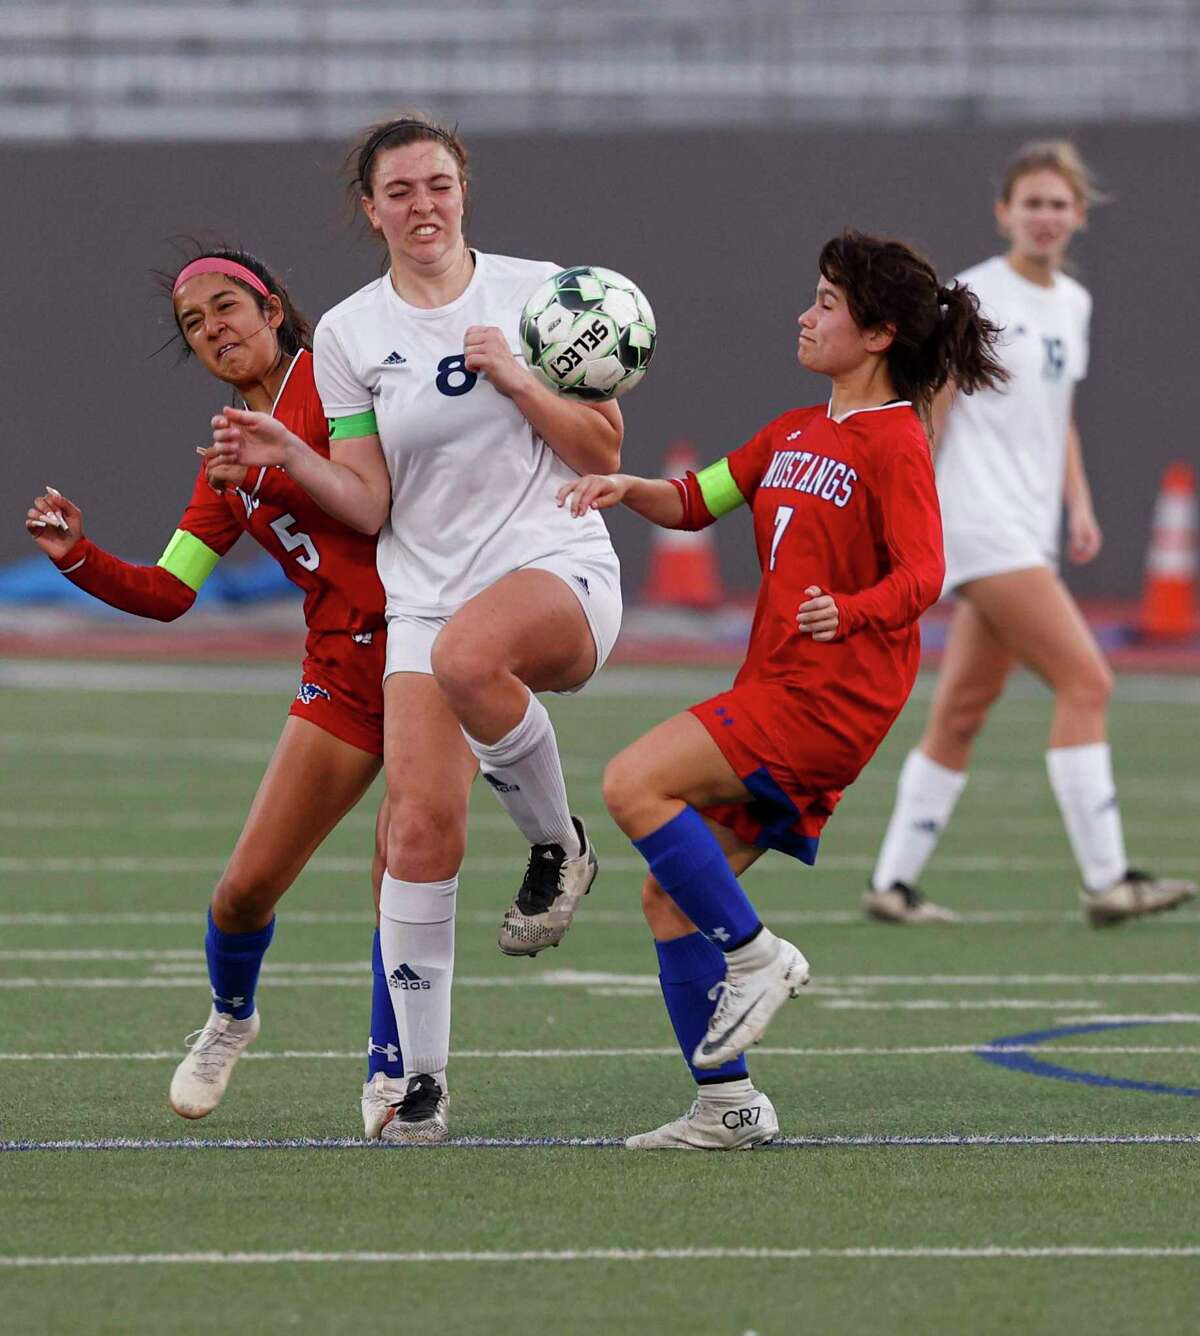 Jefferson's Arianna Solis (5), Boerne-Champion's Skyleigh Arnold (8) and Jefferson's Jaslyn Orozco (7) fight for the ball during a Class 5A playoff game at Alamo Stadium in San Antonio, Texas, Tuesday, March 29, 2022. The Boerne-Champion Chargers defeated the Jefferson Mustangs 10-0.